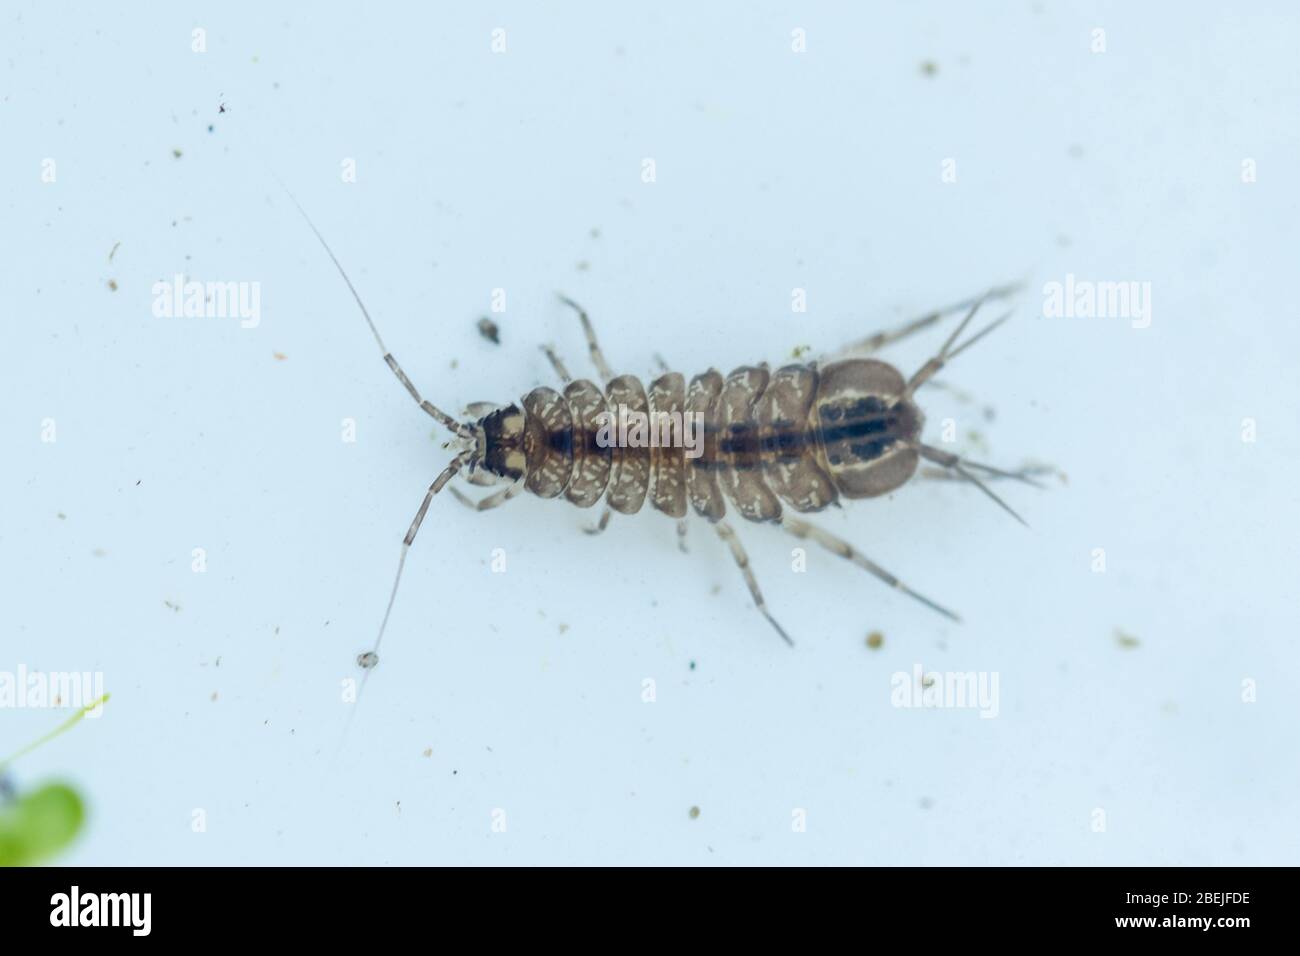 Close-up of a water slater (Asellus aquaticus), a freshwater crustacean, UK Stock Photo